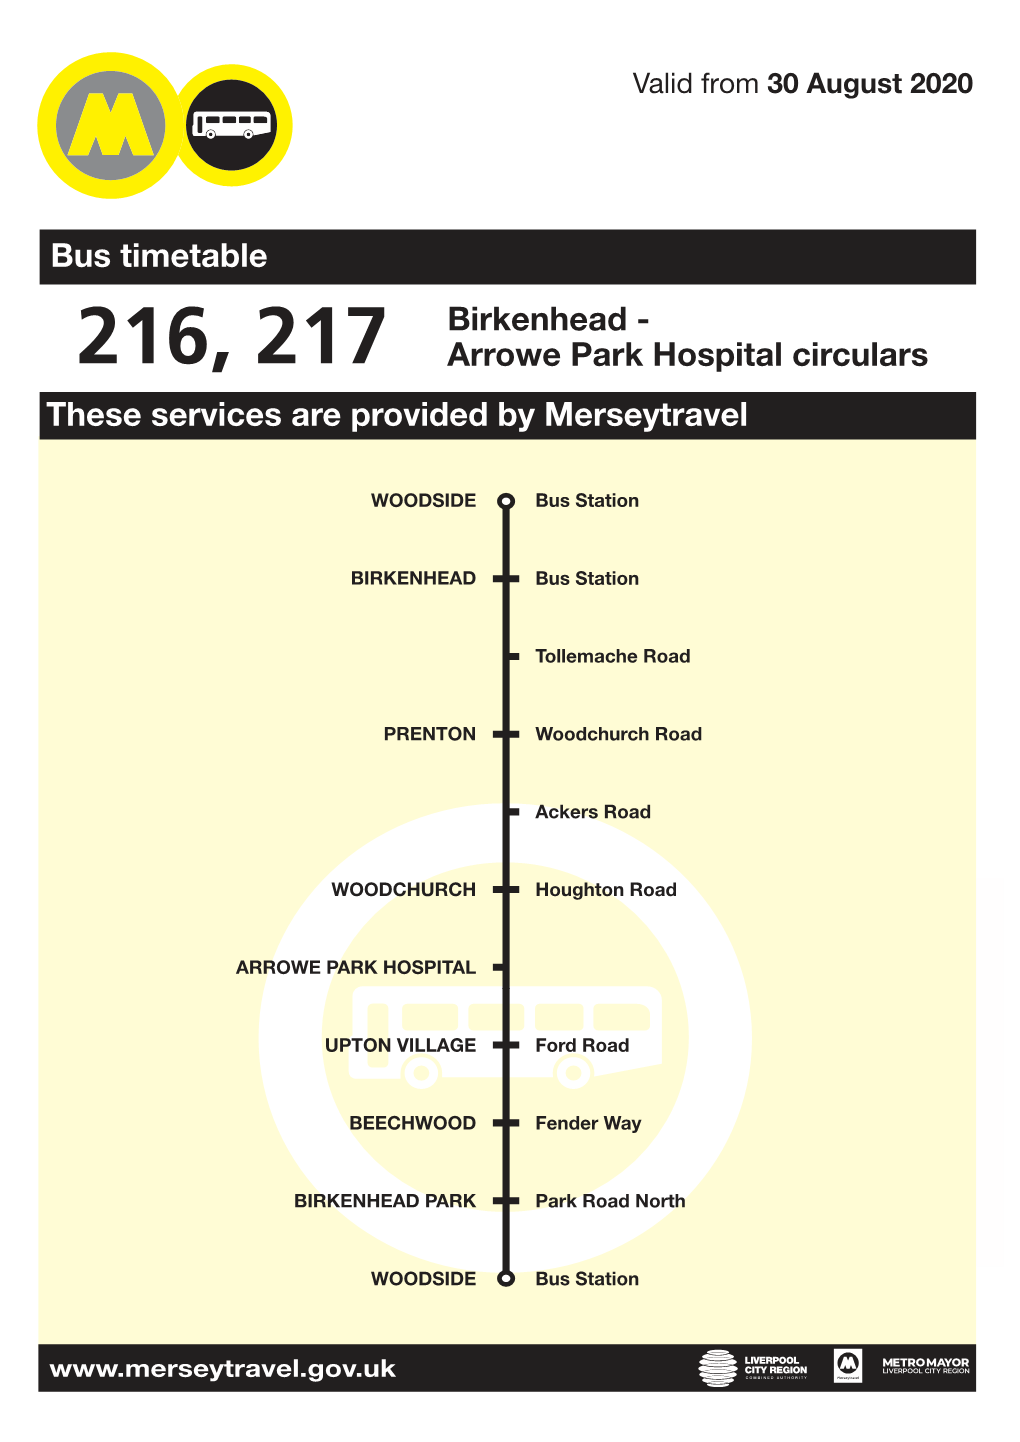 Bus Timetable These Services Are Provided by Merseytravel